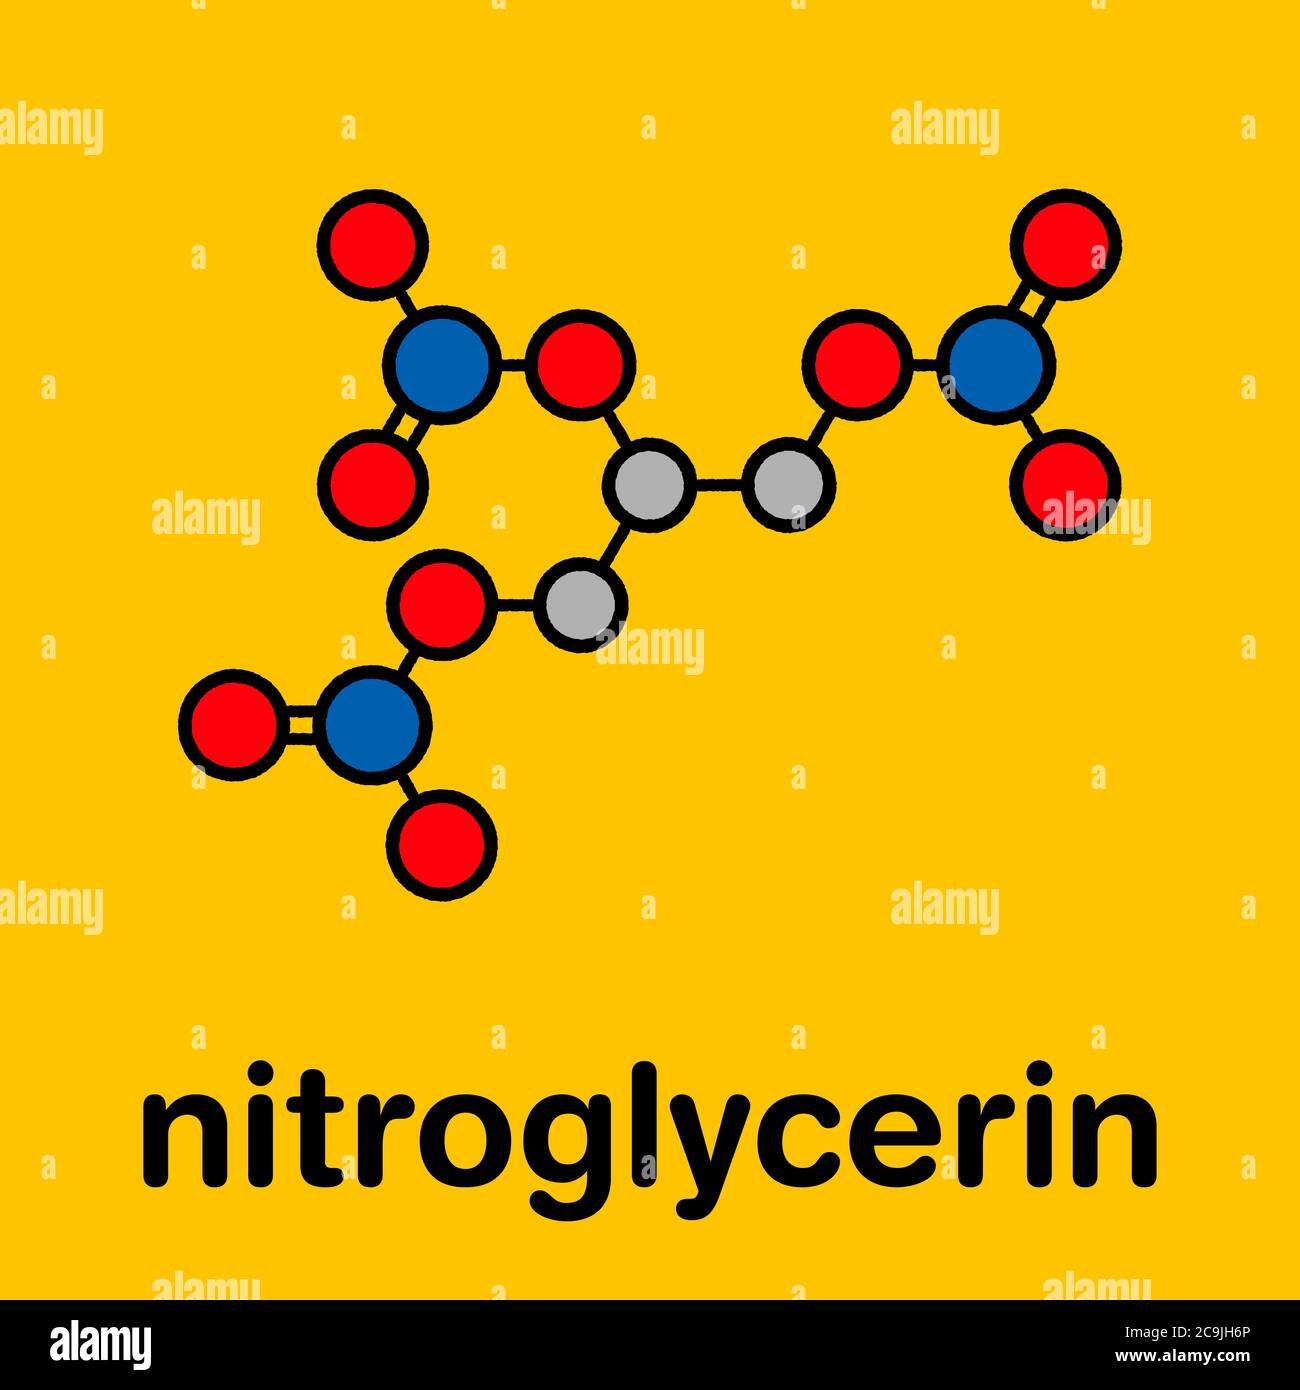 Nitroglycerin (nitro, glyceryl trinitrate) drug and explosive molecule. Stylized skeletal formula (chemical structure). Atoms are shown as color-coded Stock Photo